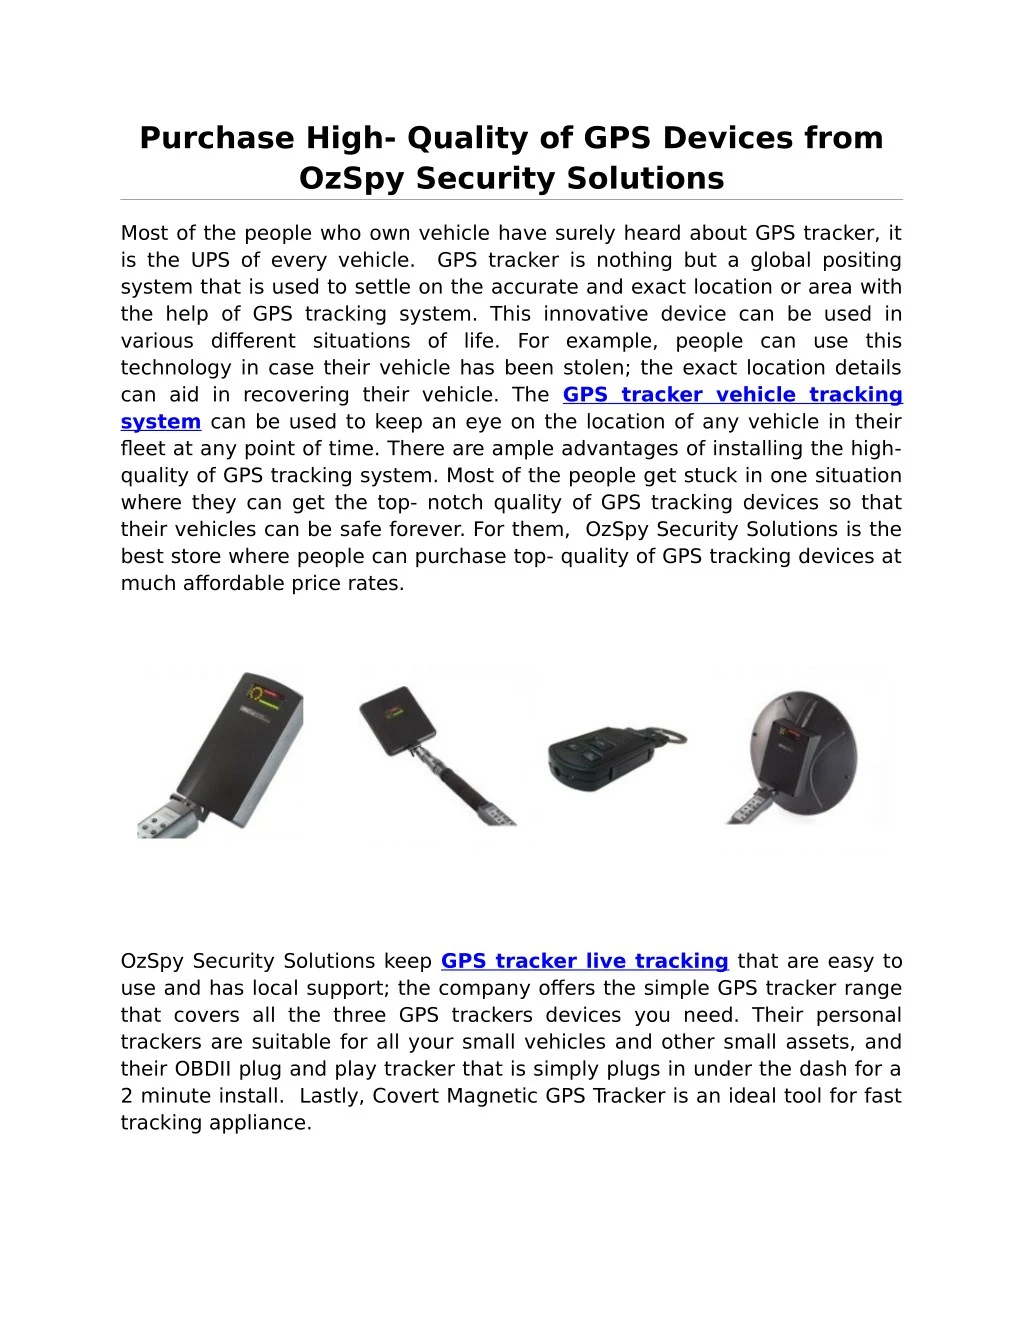 purchase high quality of gps devices from ozspy